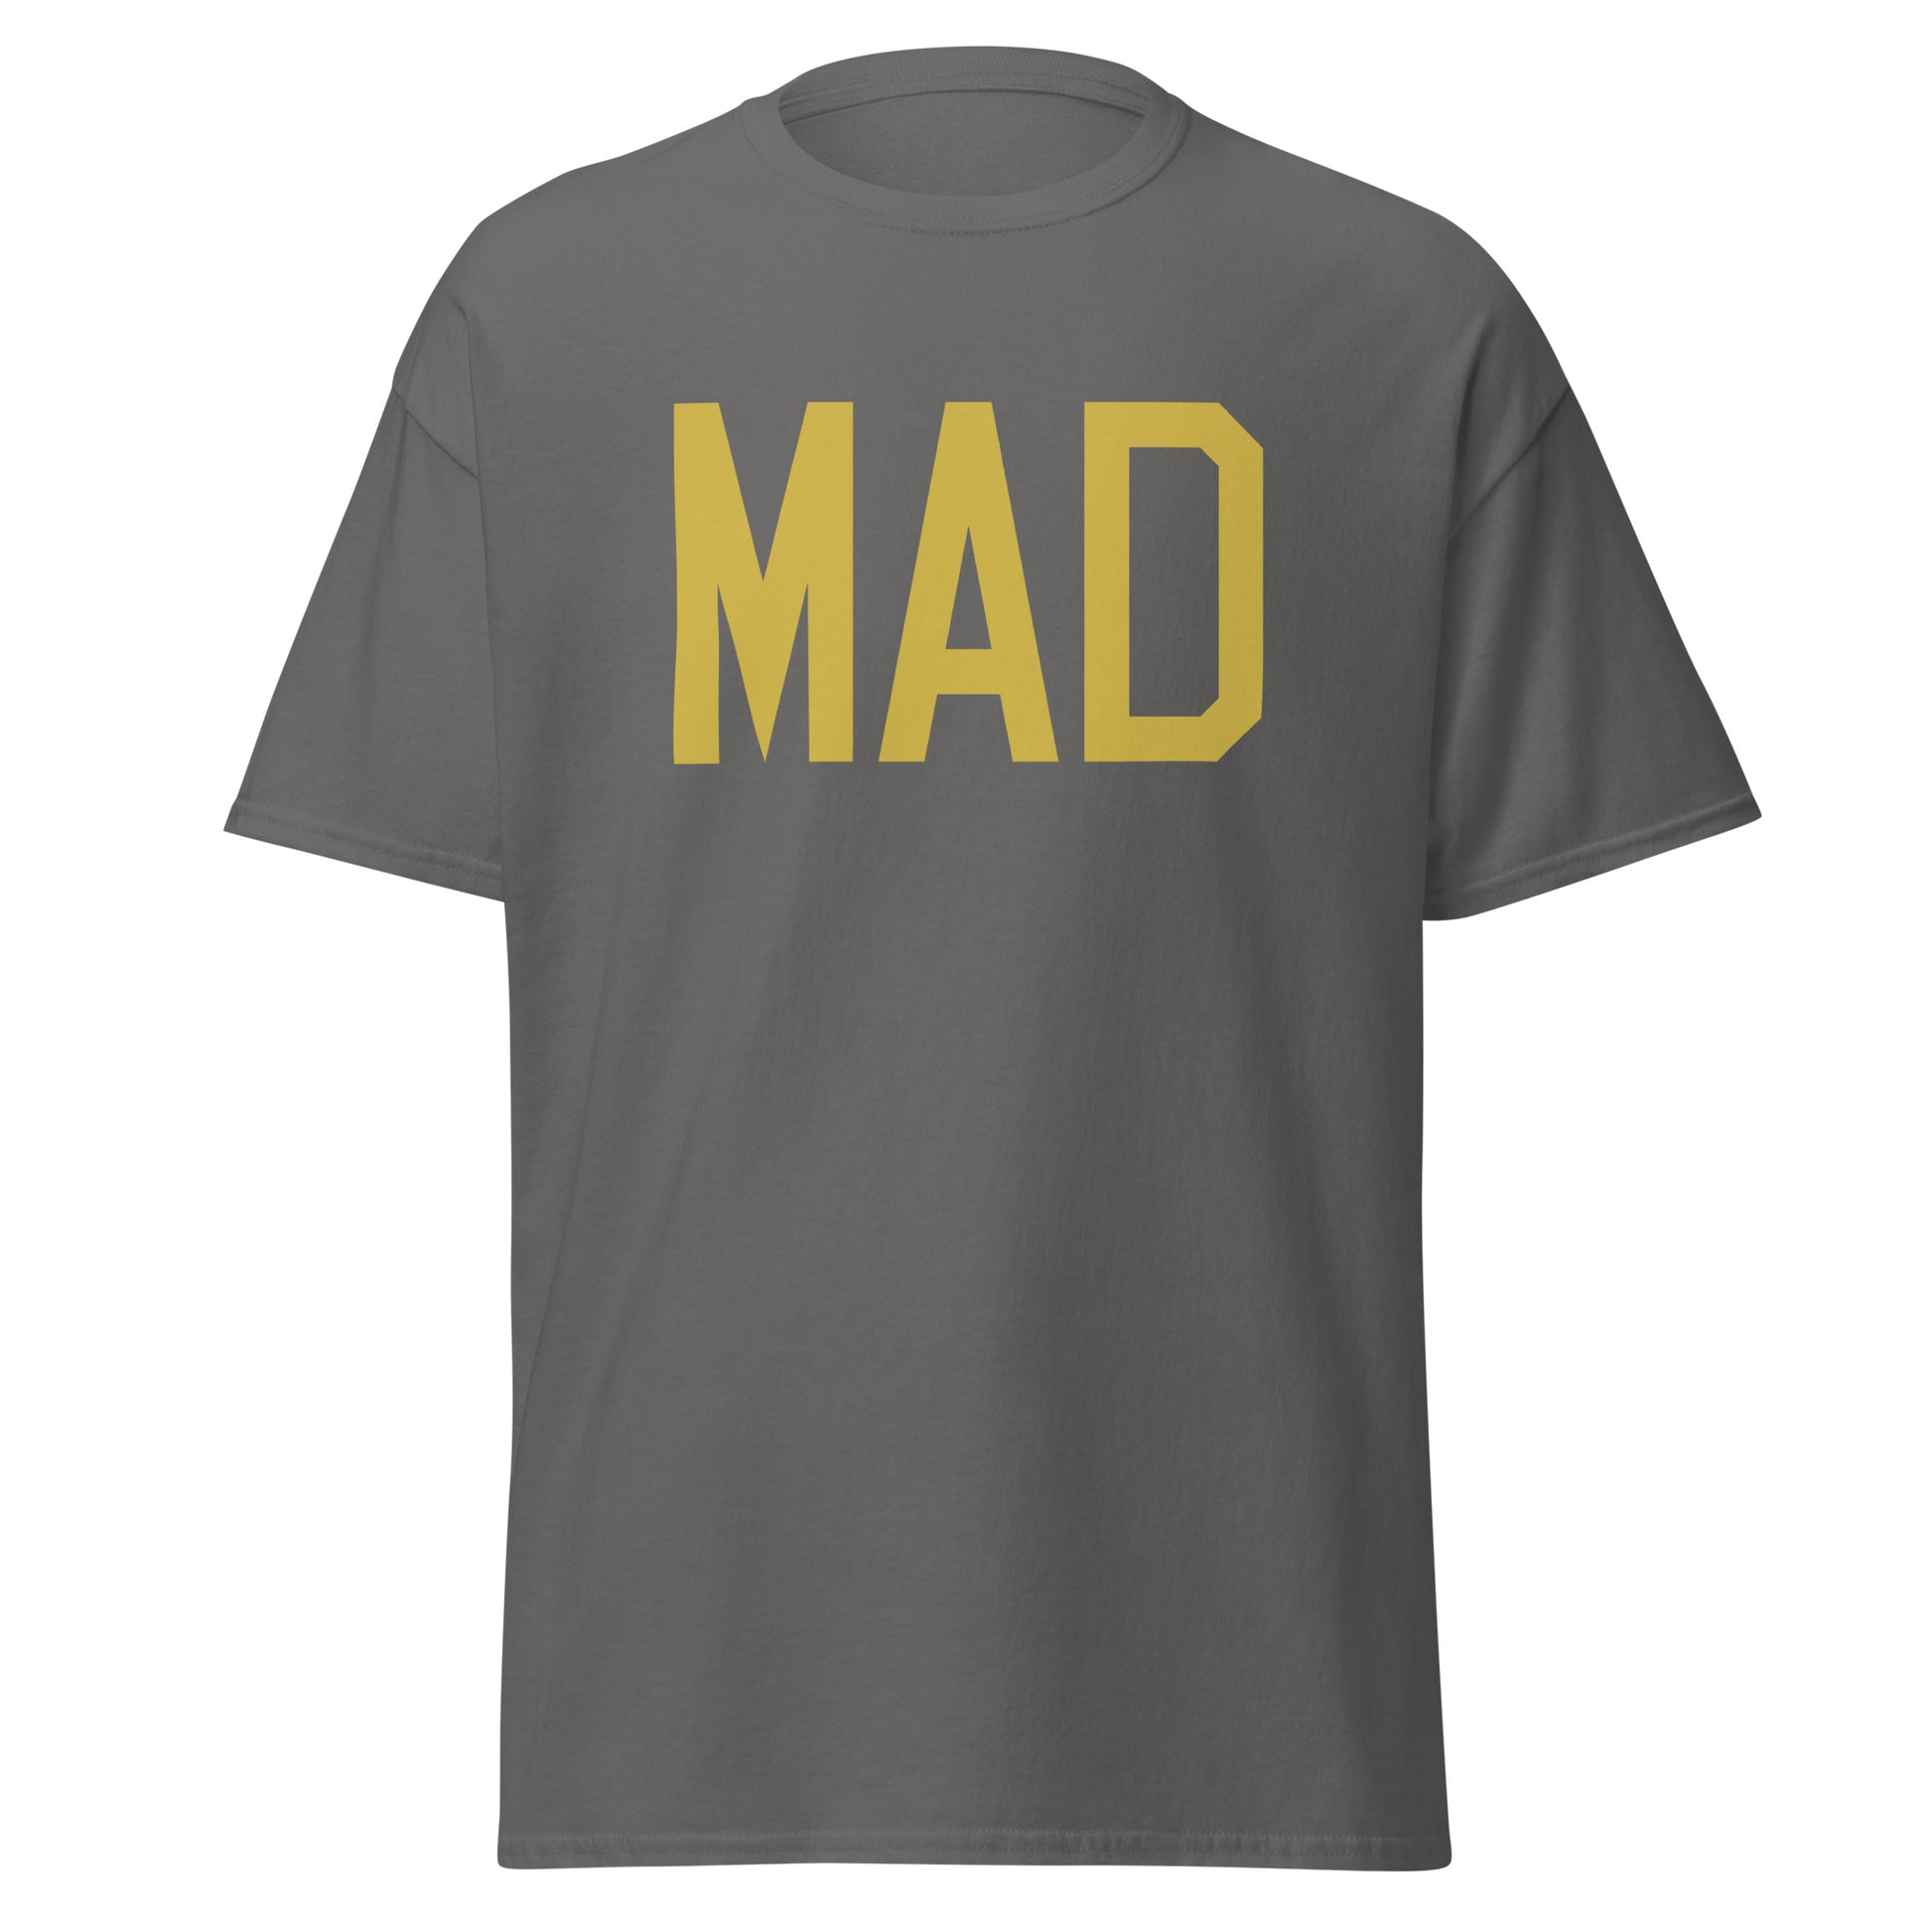 Aviation Enthusiast Men's Tee - Old Gold Graphic • MAD Madrid • YHM Designs - Image 05